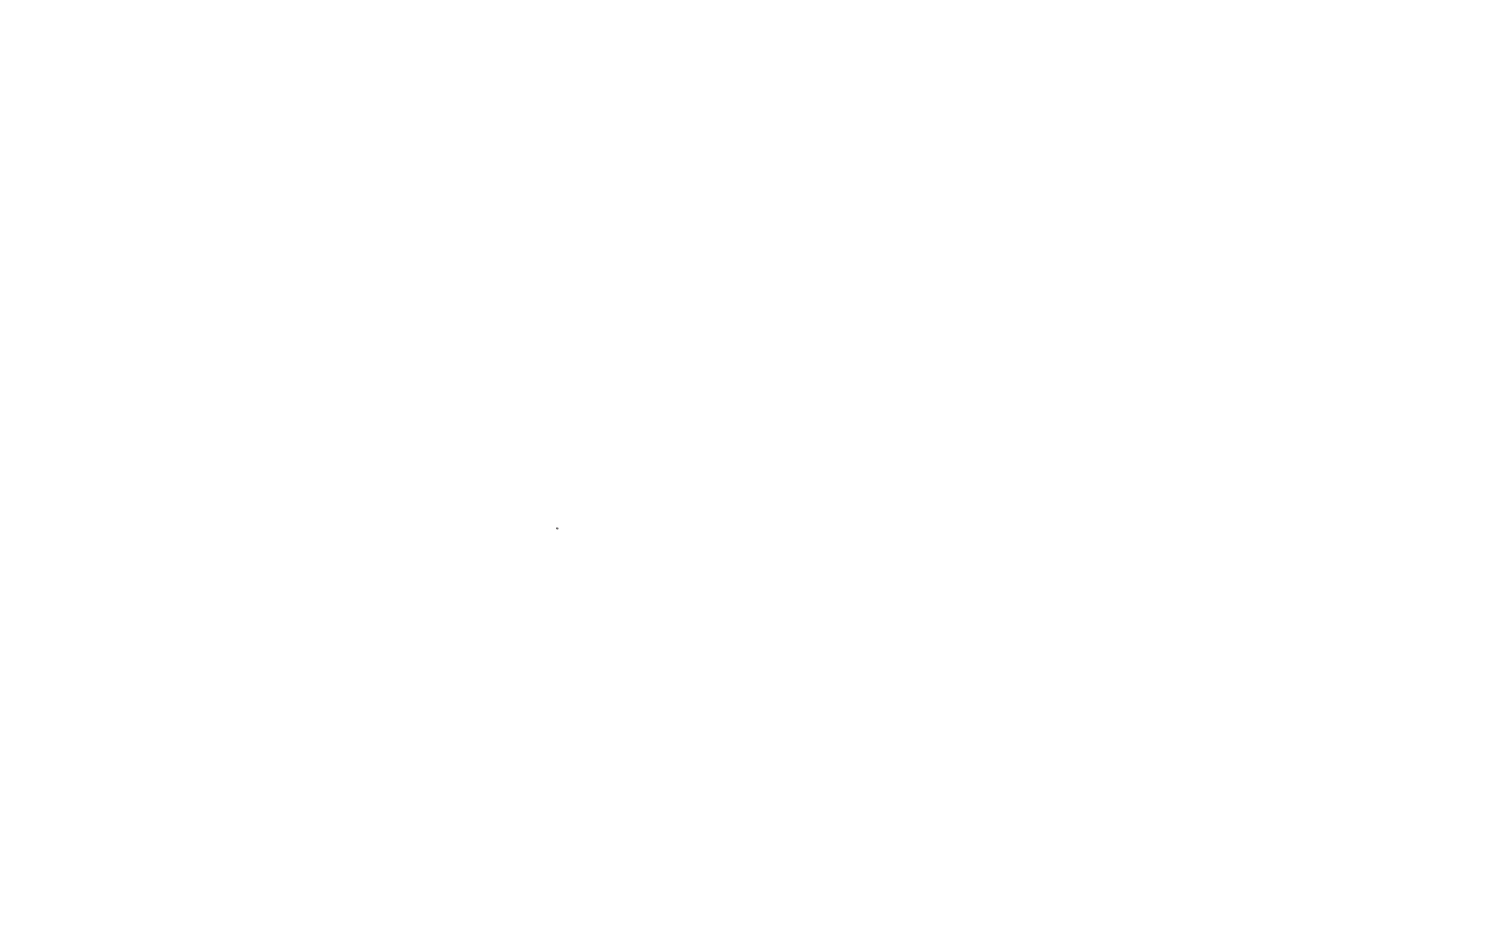 The Muckers